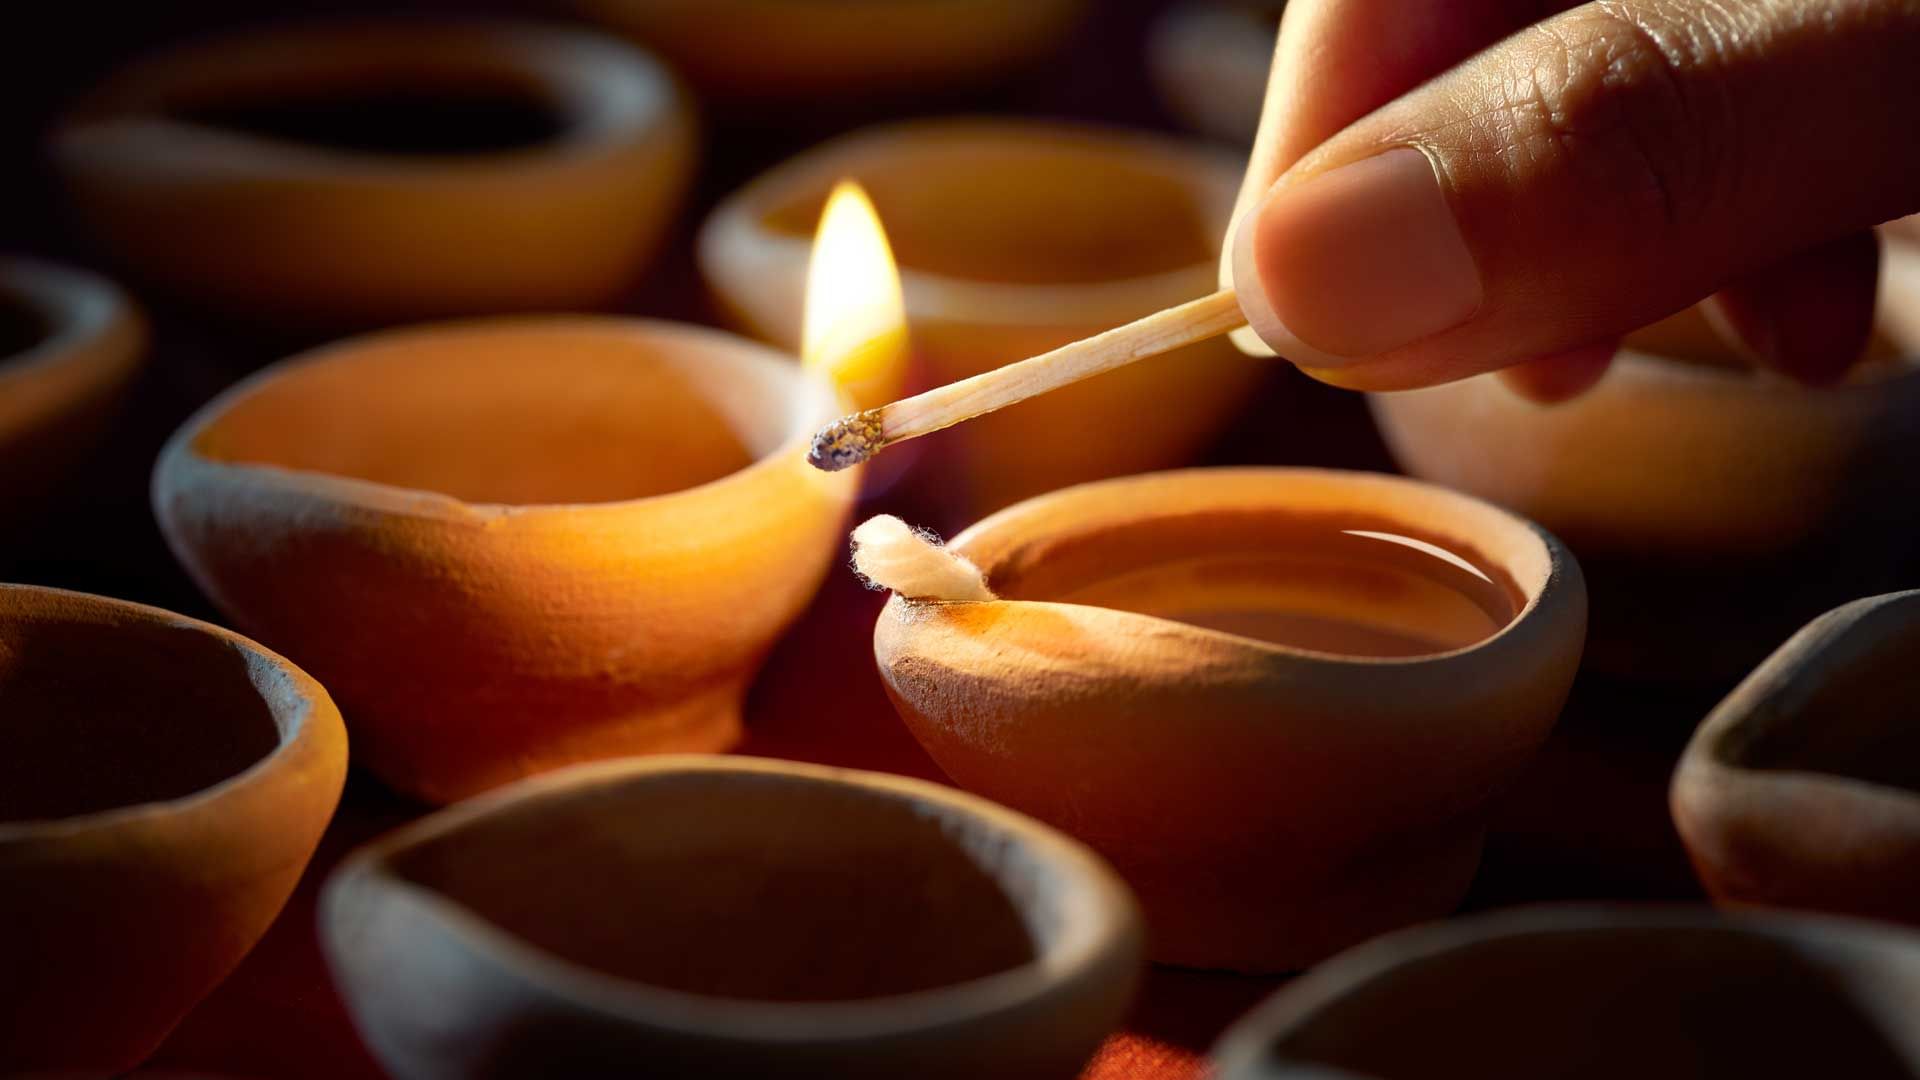 Diwali – Lighting the Fire Within